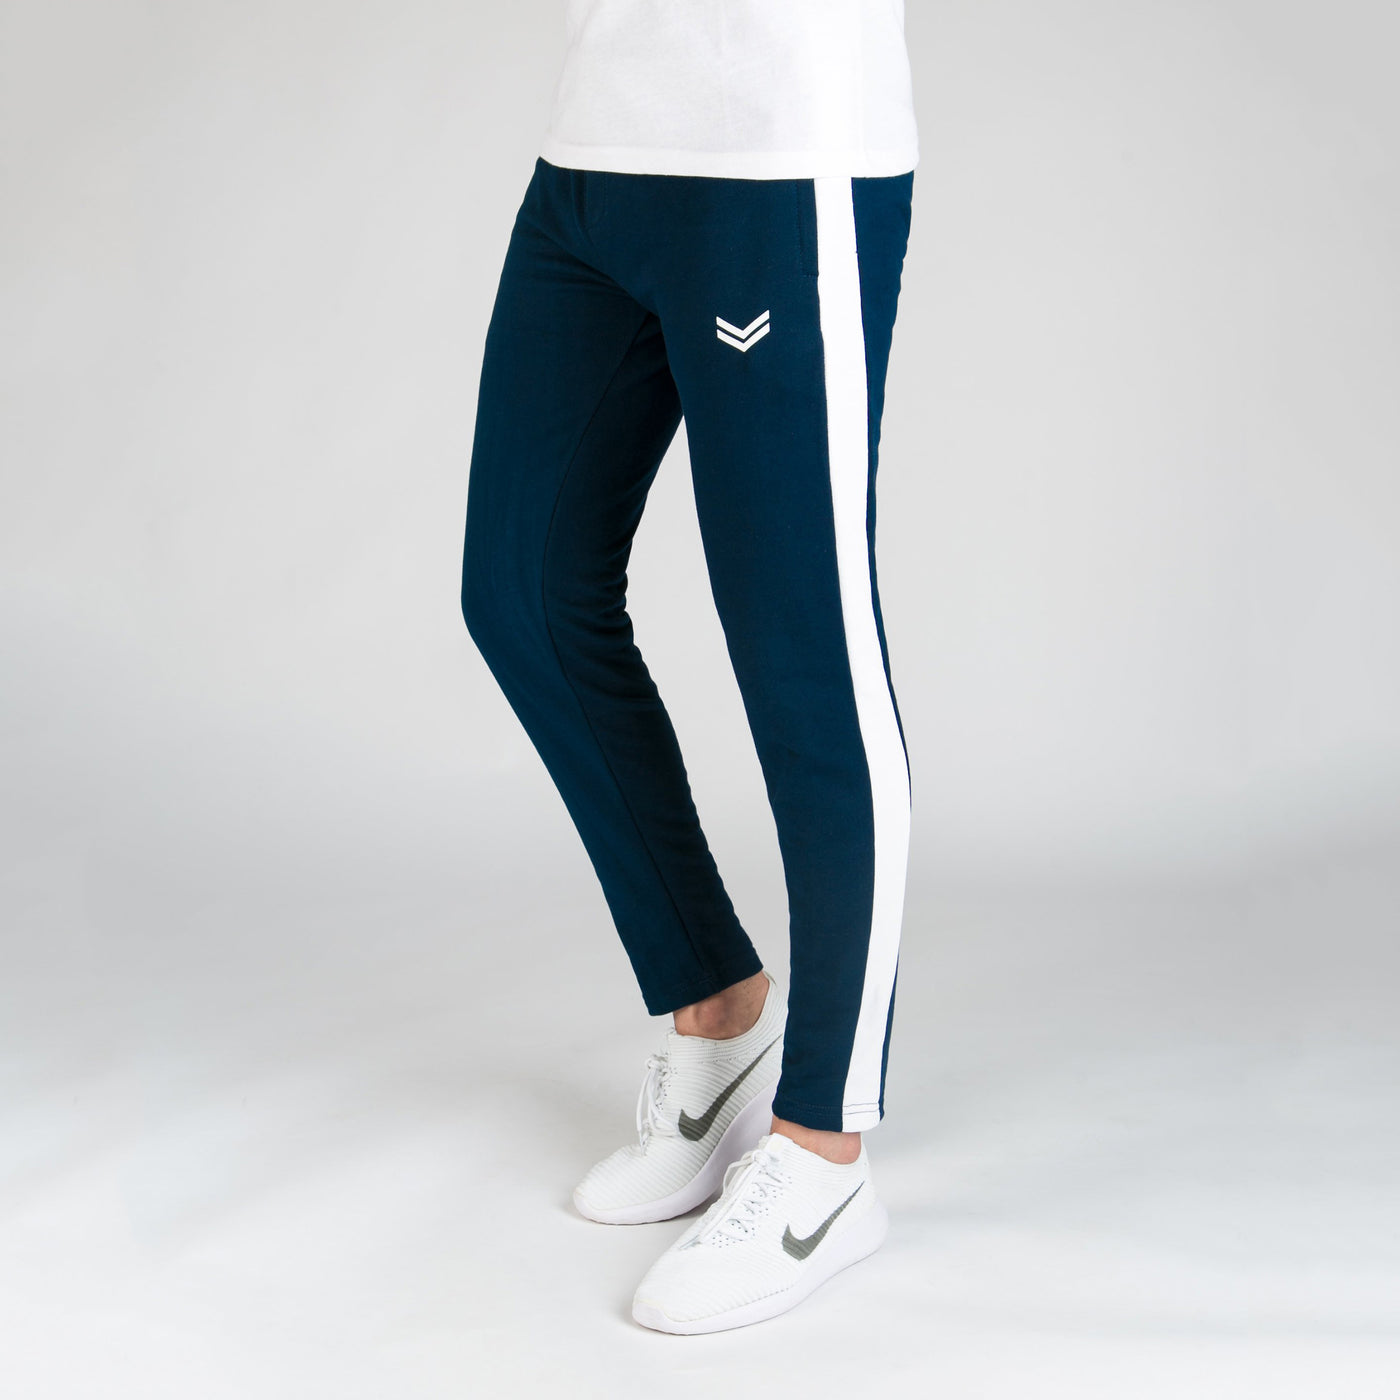 Navy Bottoms With White Side Panel